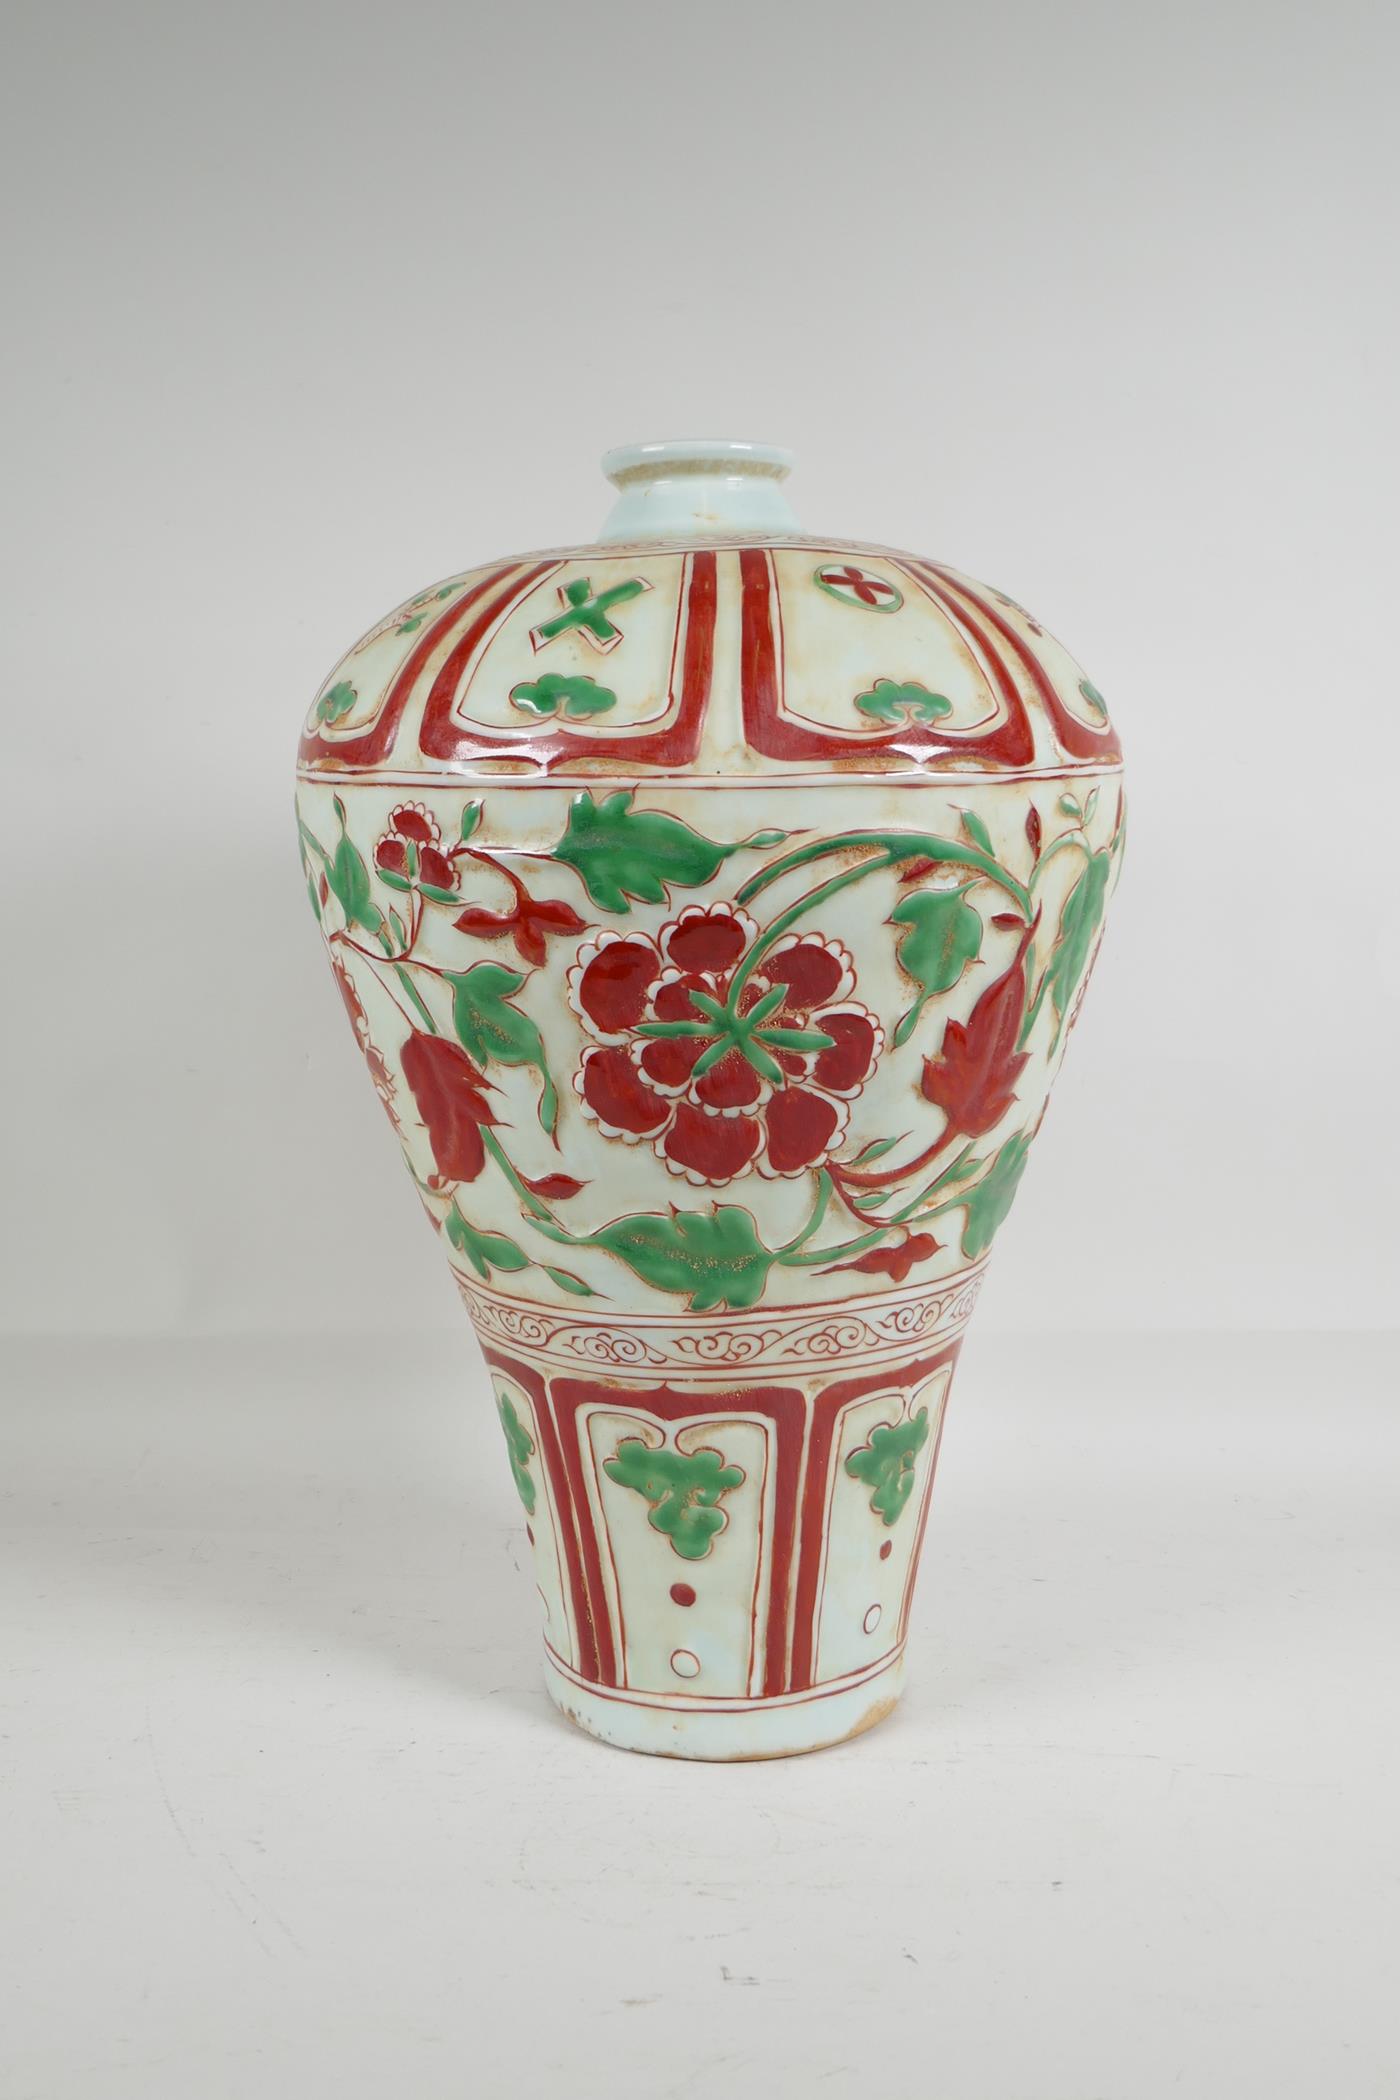 A Chinese red & green porcelain Meiping vase, with raised scrolling floral decoration, 15" high - Image 2 of 6